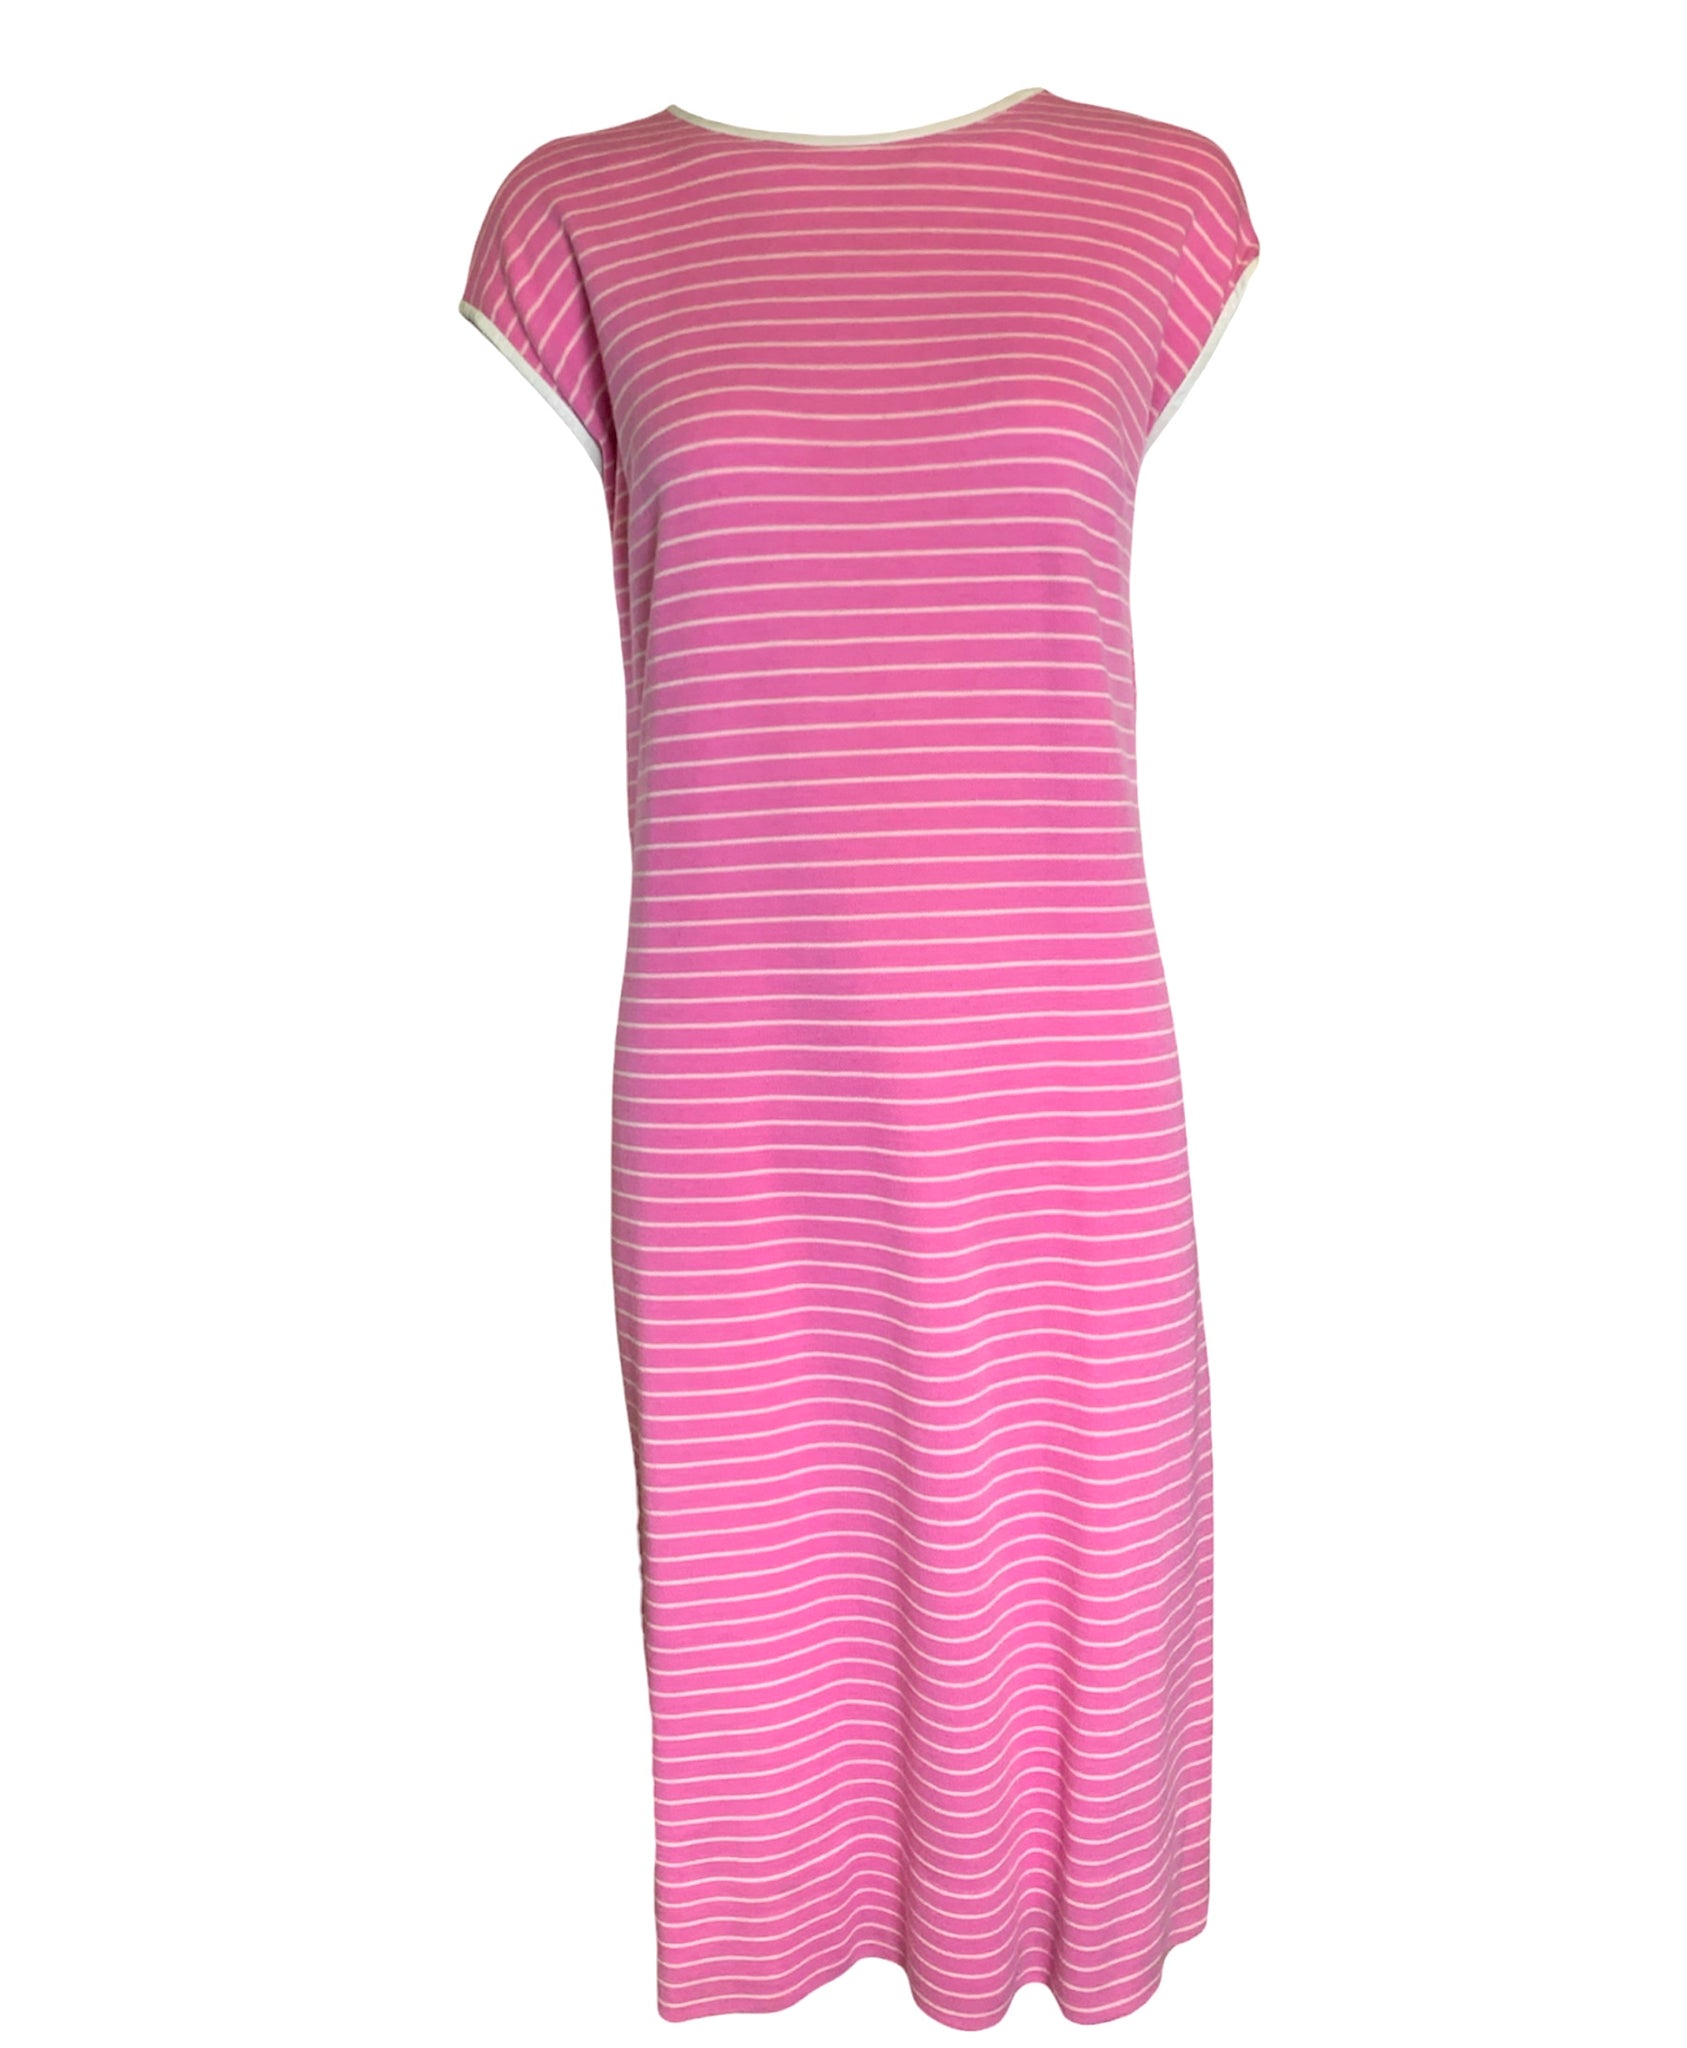  Bonnie Cashin for Sills  60s Blue and Pink Striped Coat and Dress Ensemble DRESS FRONT 4 of 7